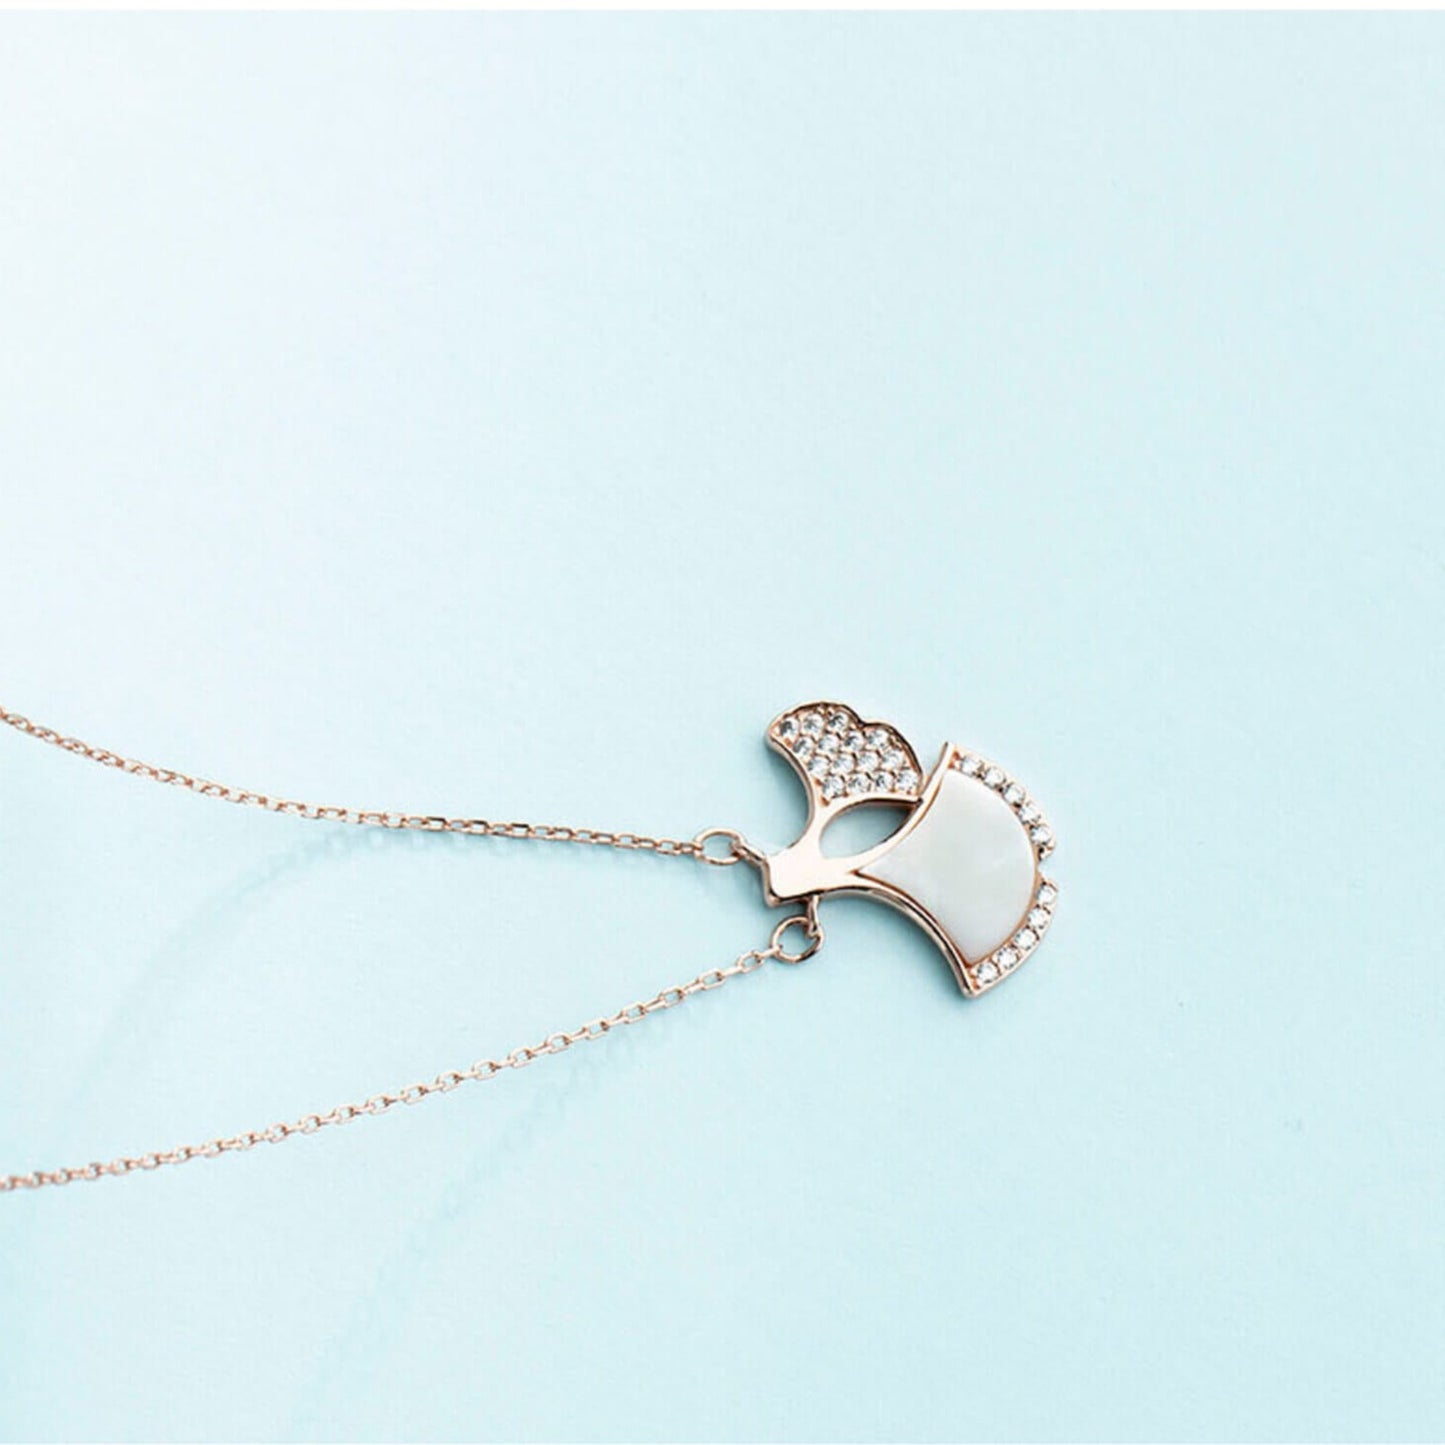 shell gingko necklace use silver